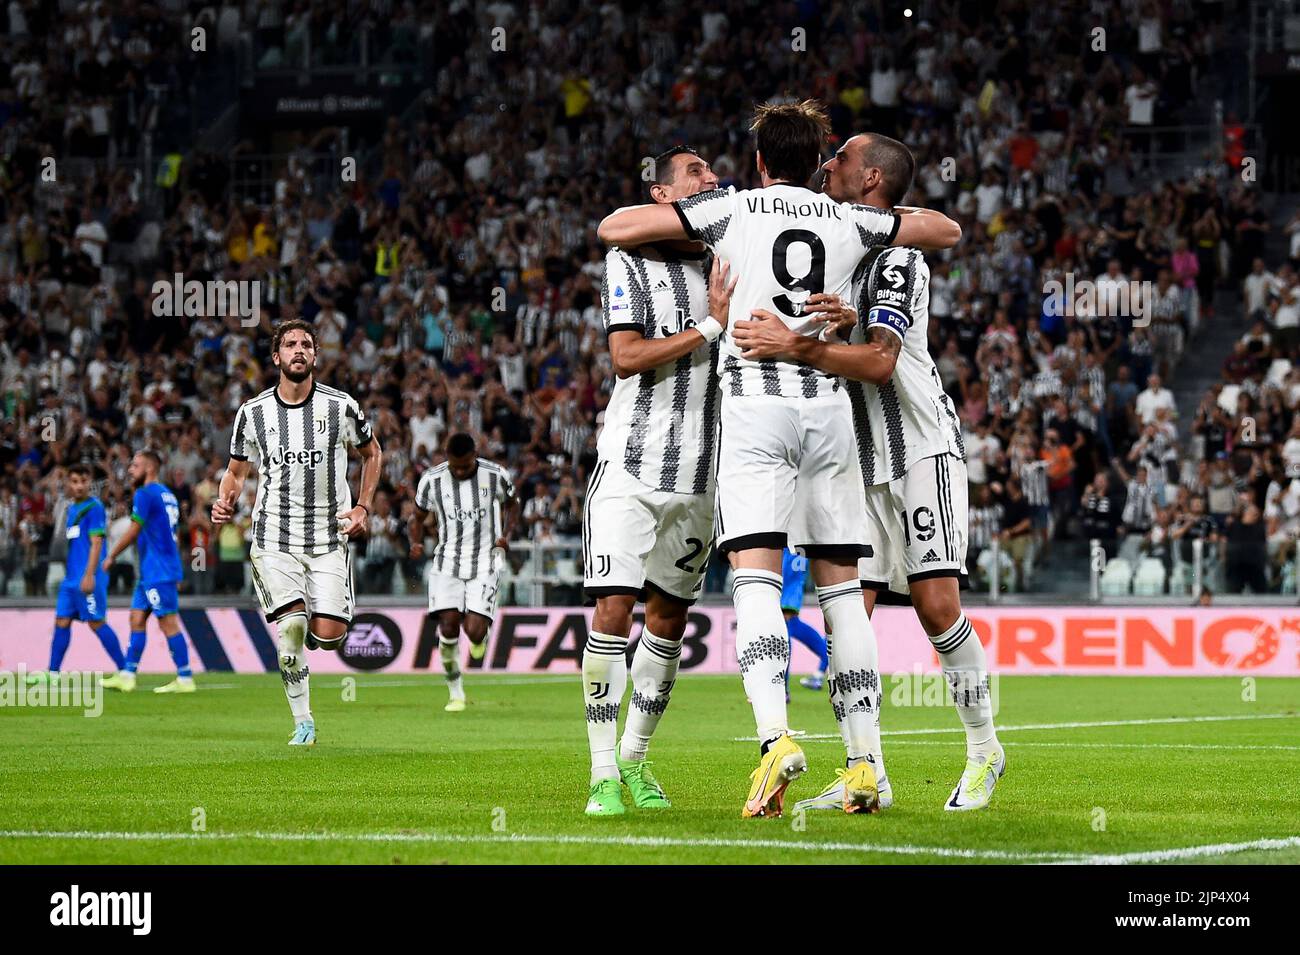 Turin, Italy. 15 August 2022. Dusan Vlahovic of Juventus FC celebrates with his teammates after scoring a goal during the Serie A football match between Juventus FC and US Sassuolo. Credit: Nicolò Campo/Alamy Live News Stock Photo